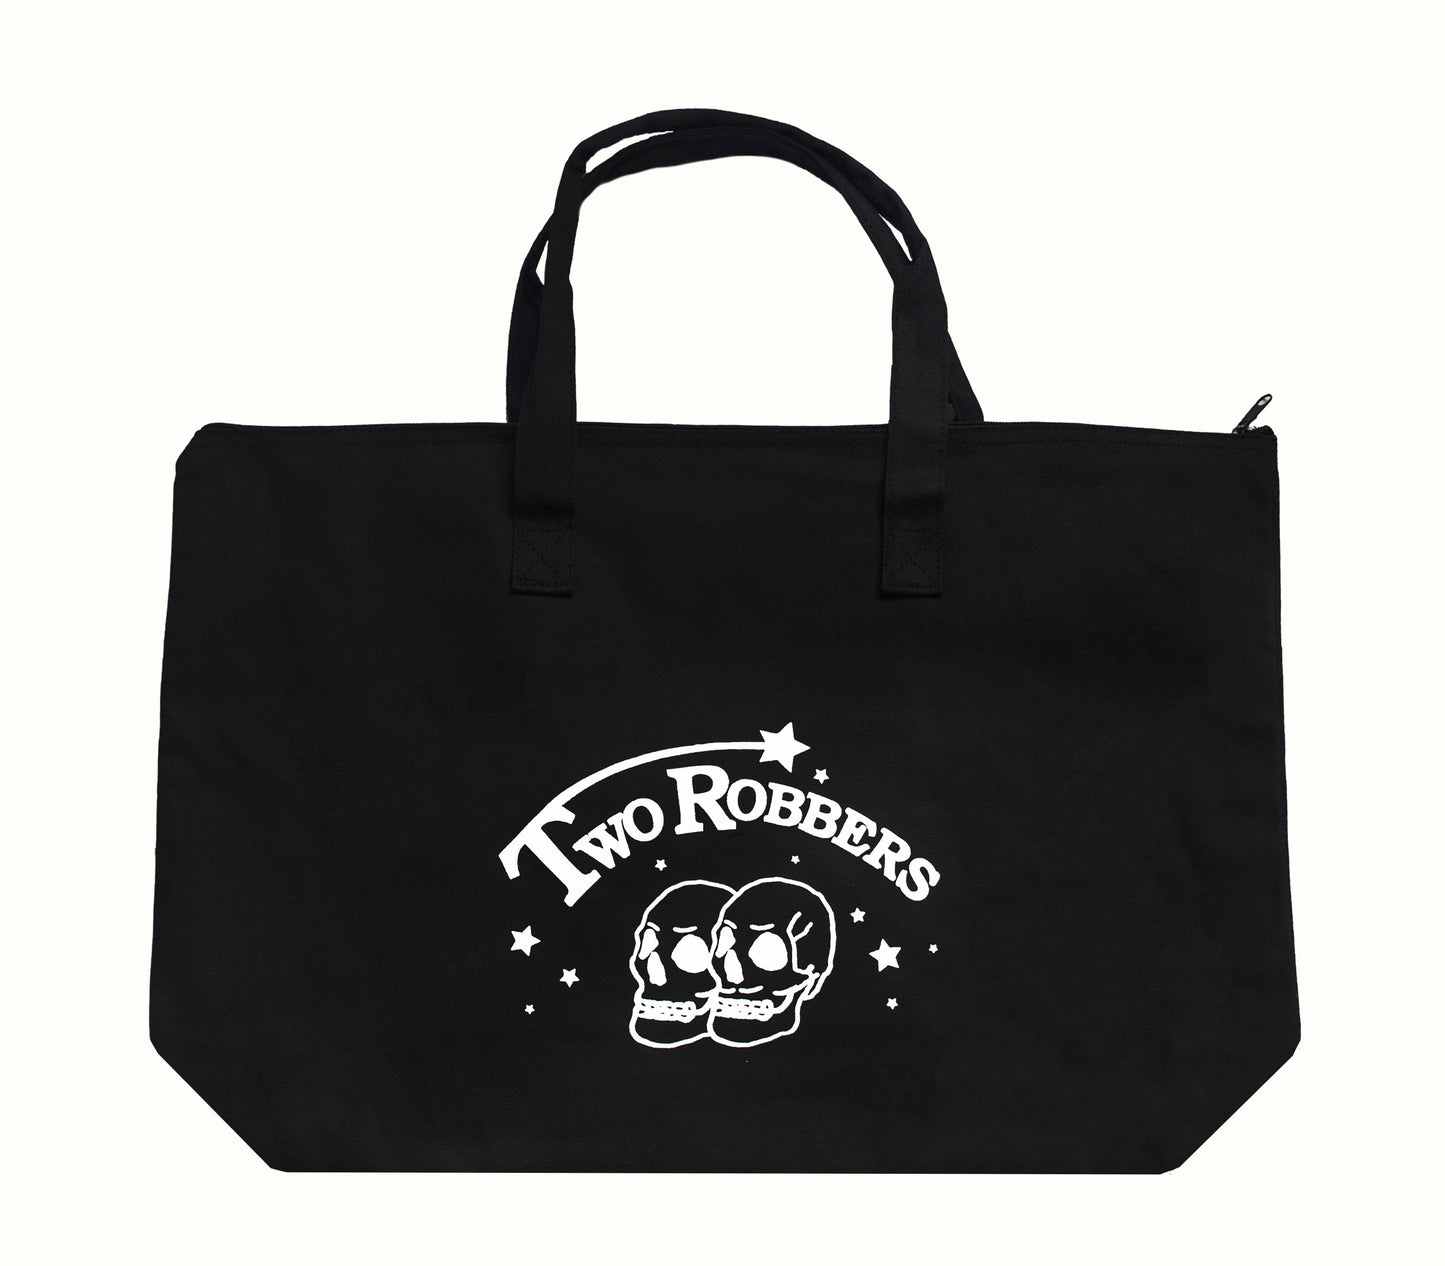 Two Robbers Logo Tote Bag